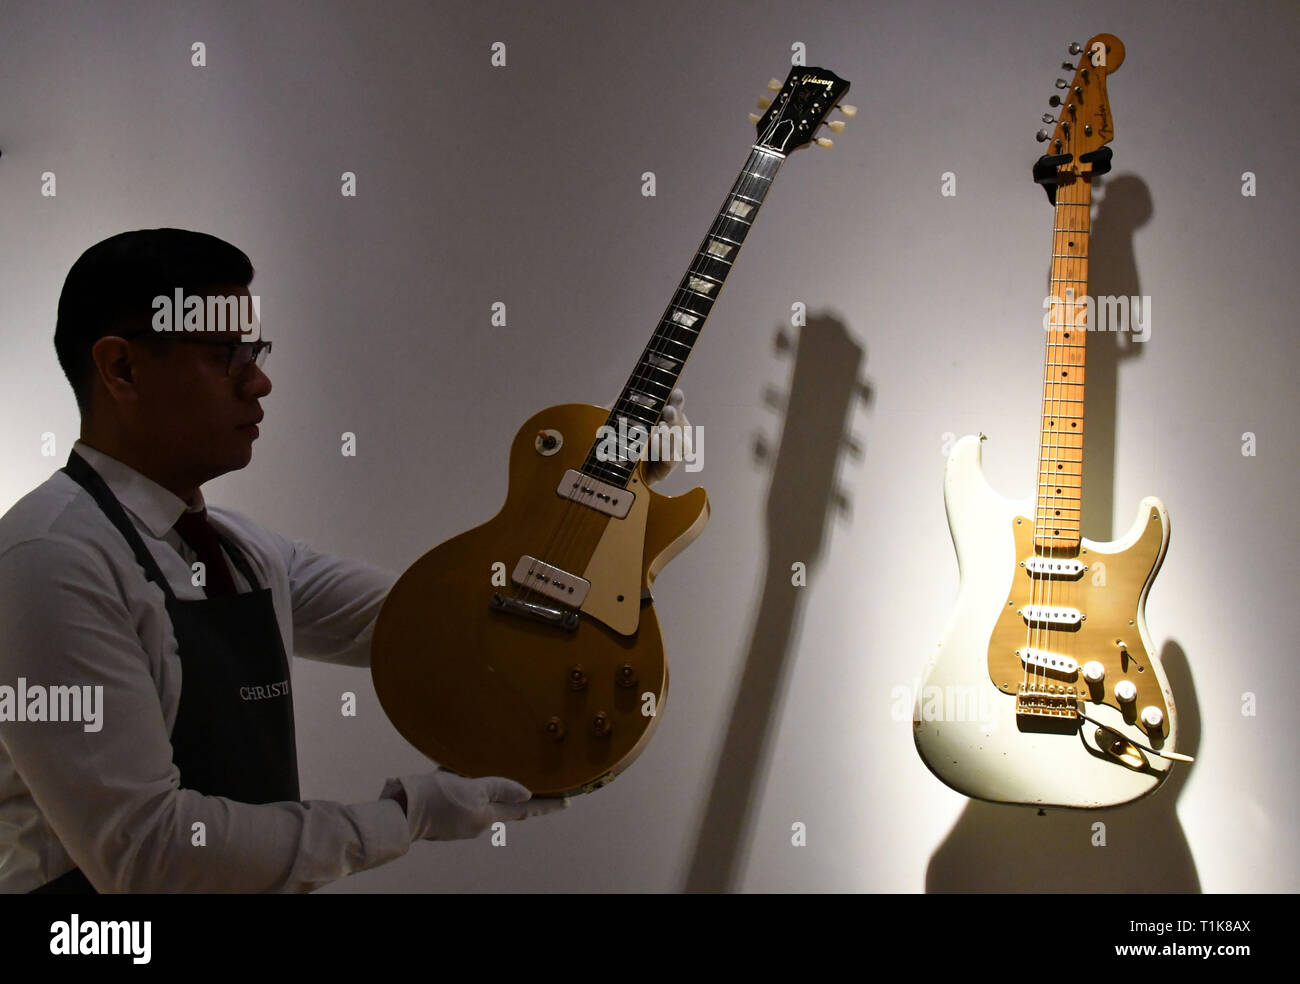 London, UK. 27th Mar, 2019. Gibson Les Paul Gold Top Kalamazoo, 1955,  estimate $30,000-50,000 and A White Fender Stratocaster with Serial Number  0001, circa 1954, estimate $100,000-150,000 at Christie's preview of the